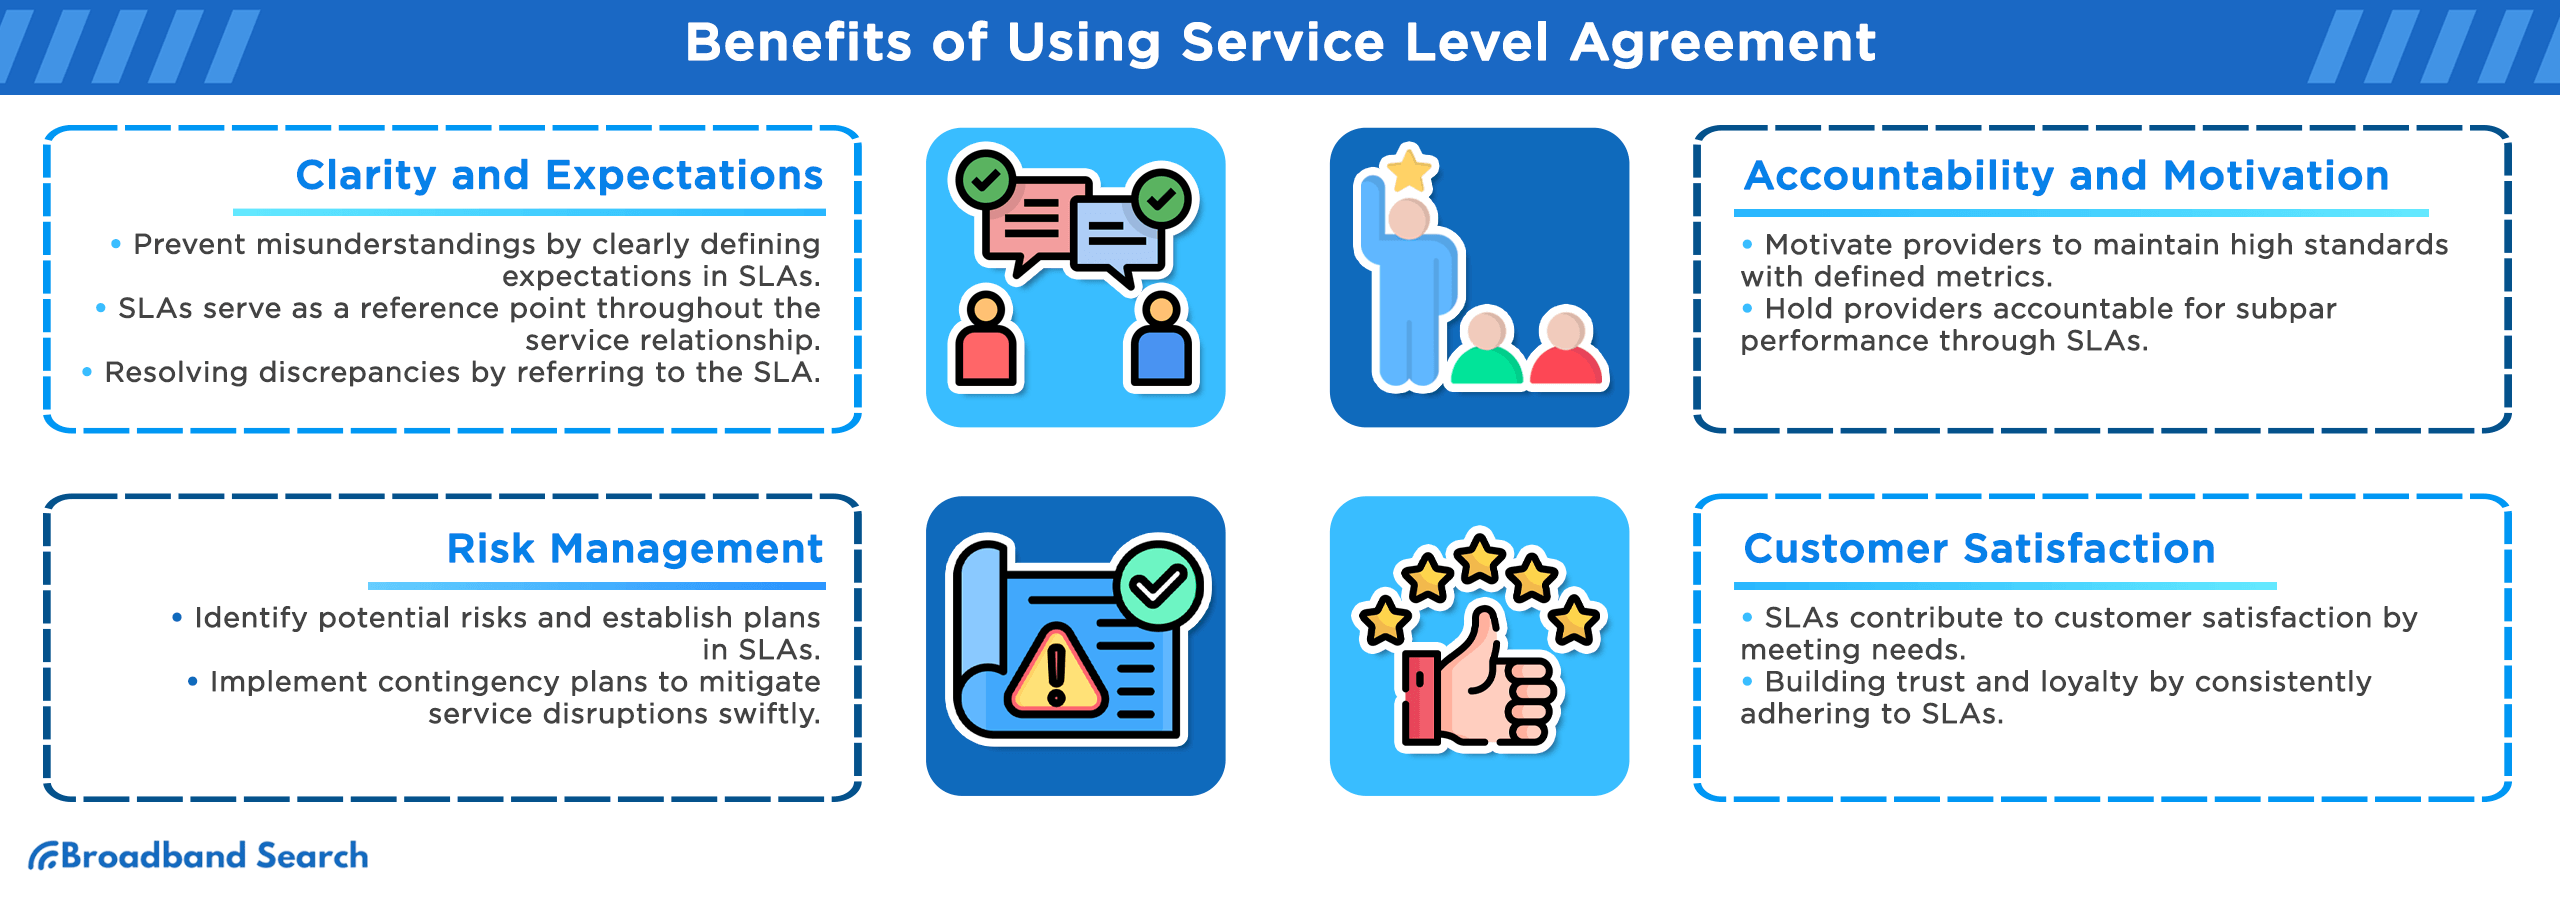 benefits of using service level agreements